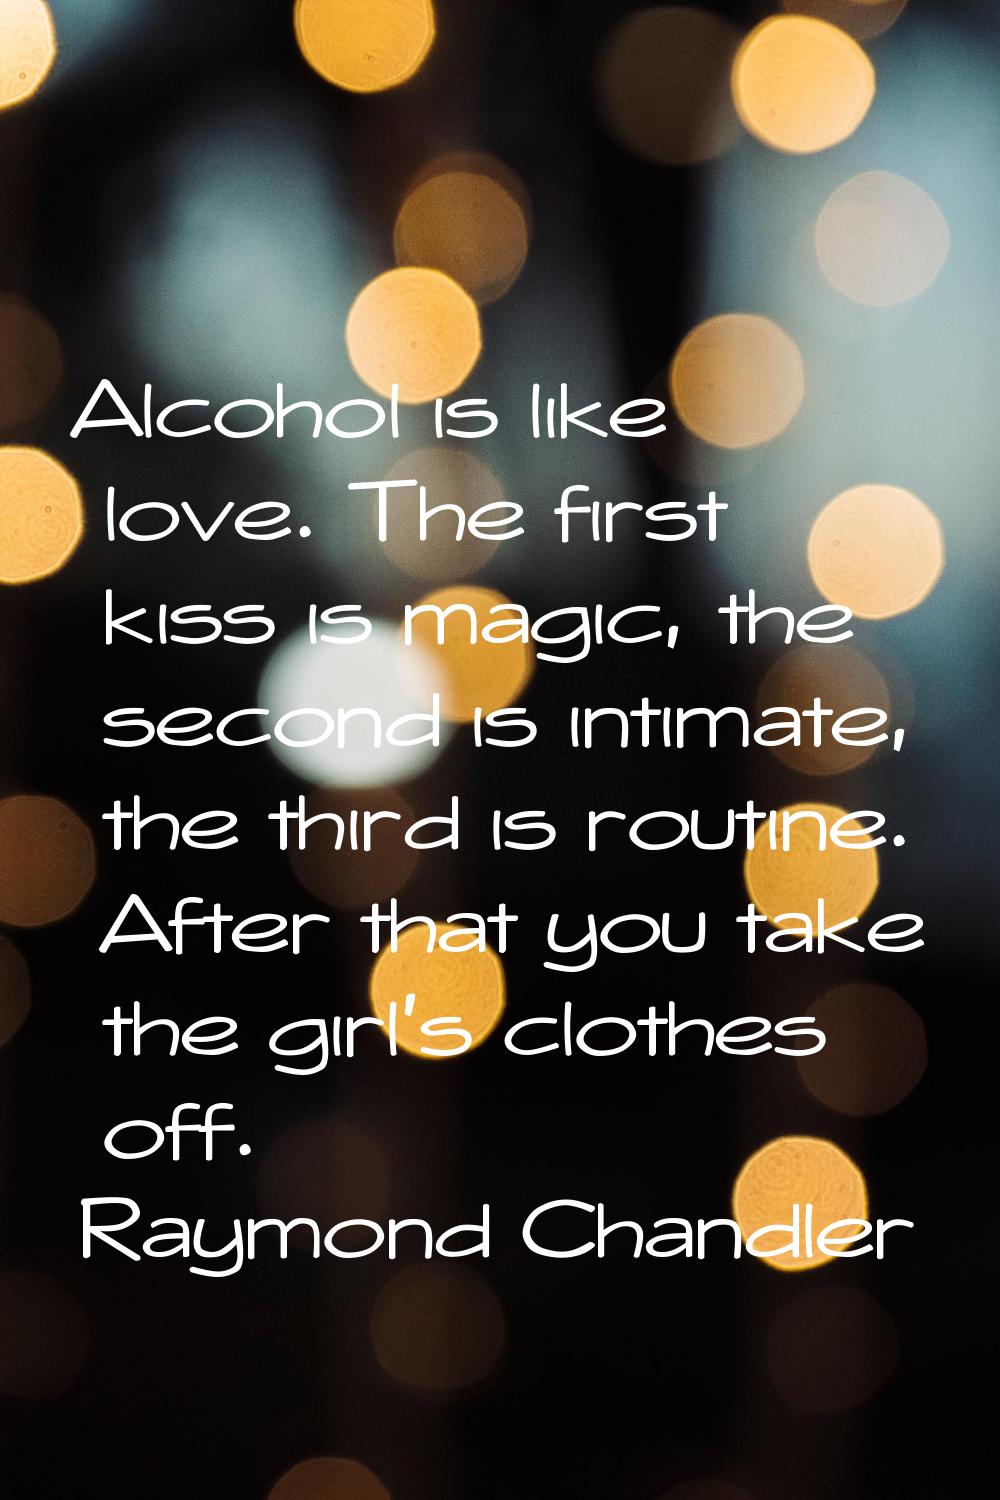 Alcohol is like love. The first kiss is magic, the second is intimate, the third is routine. After 